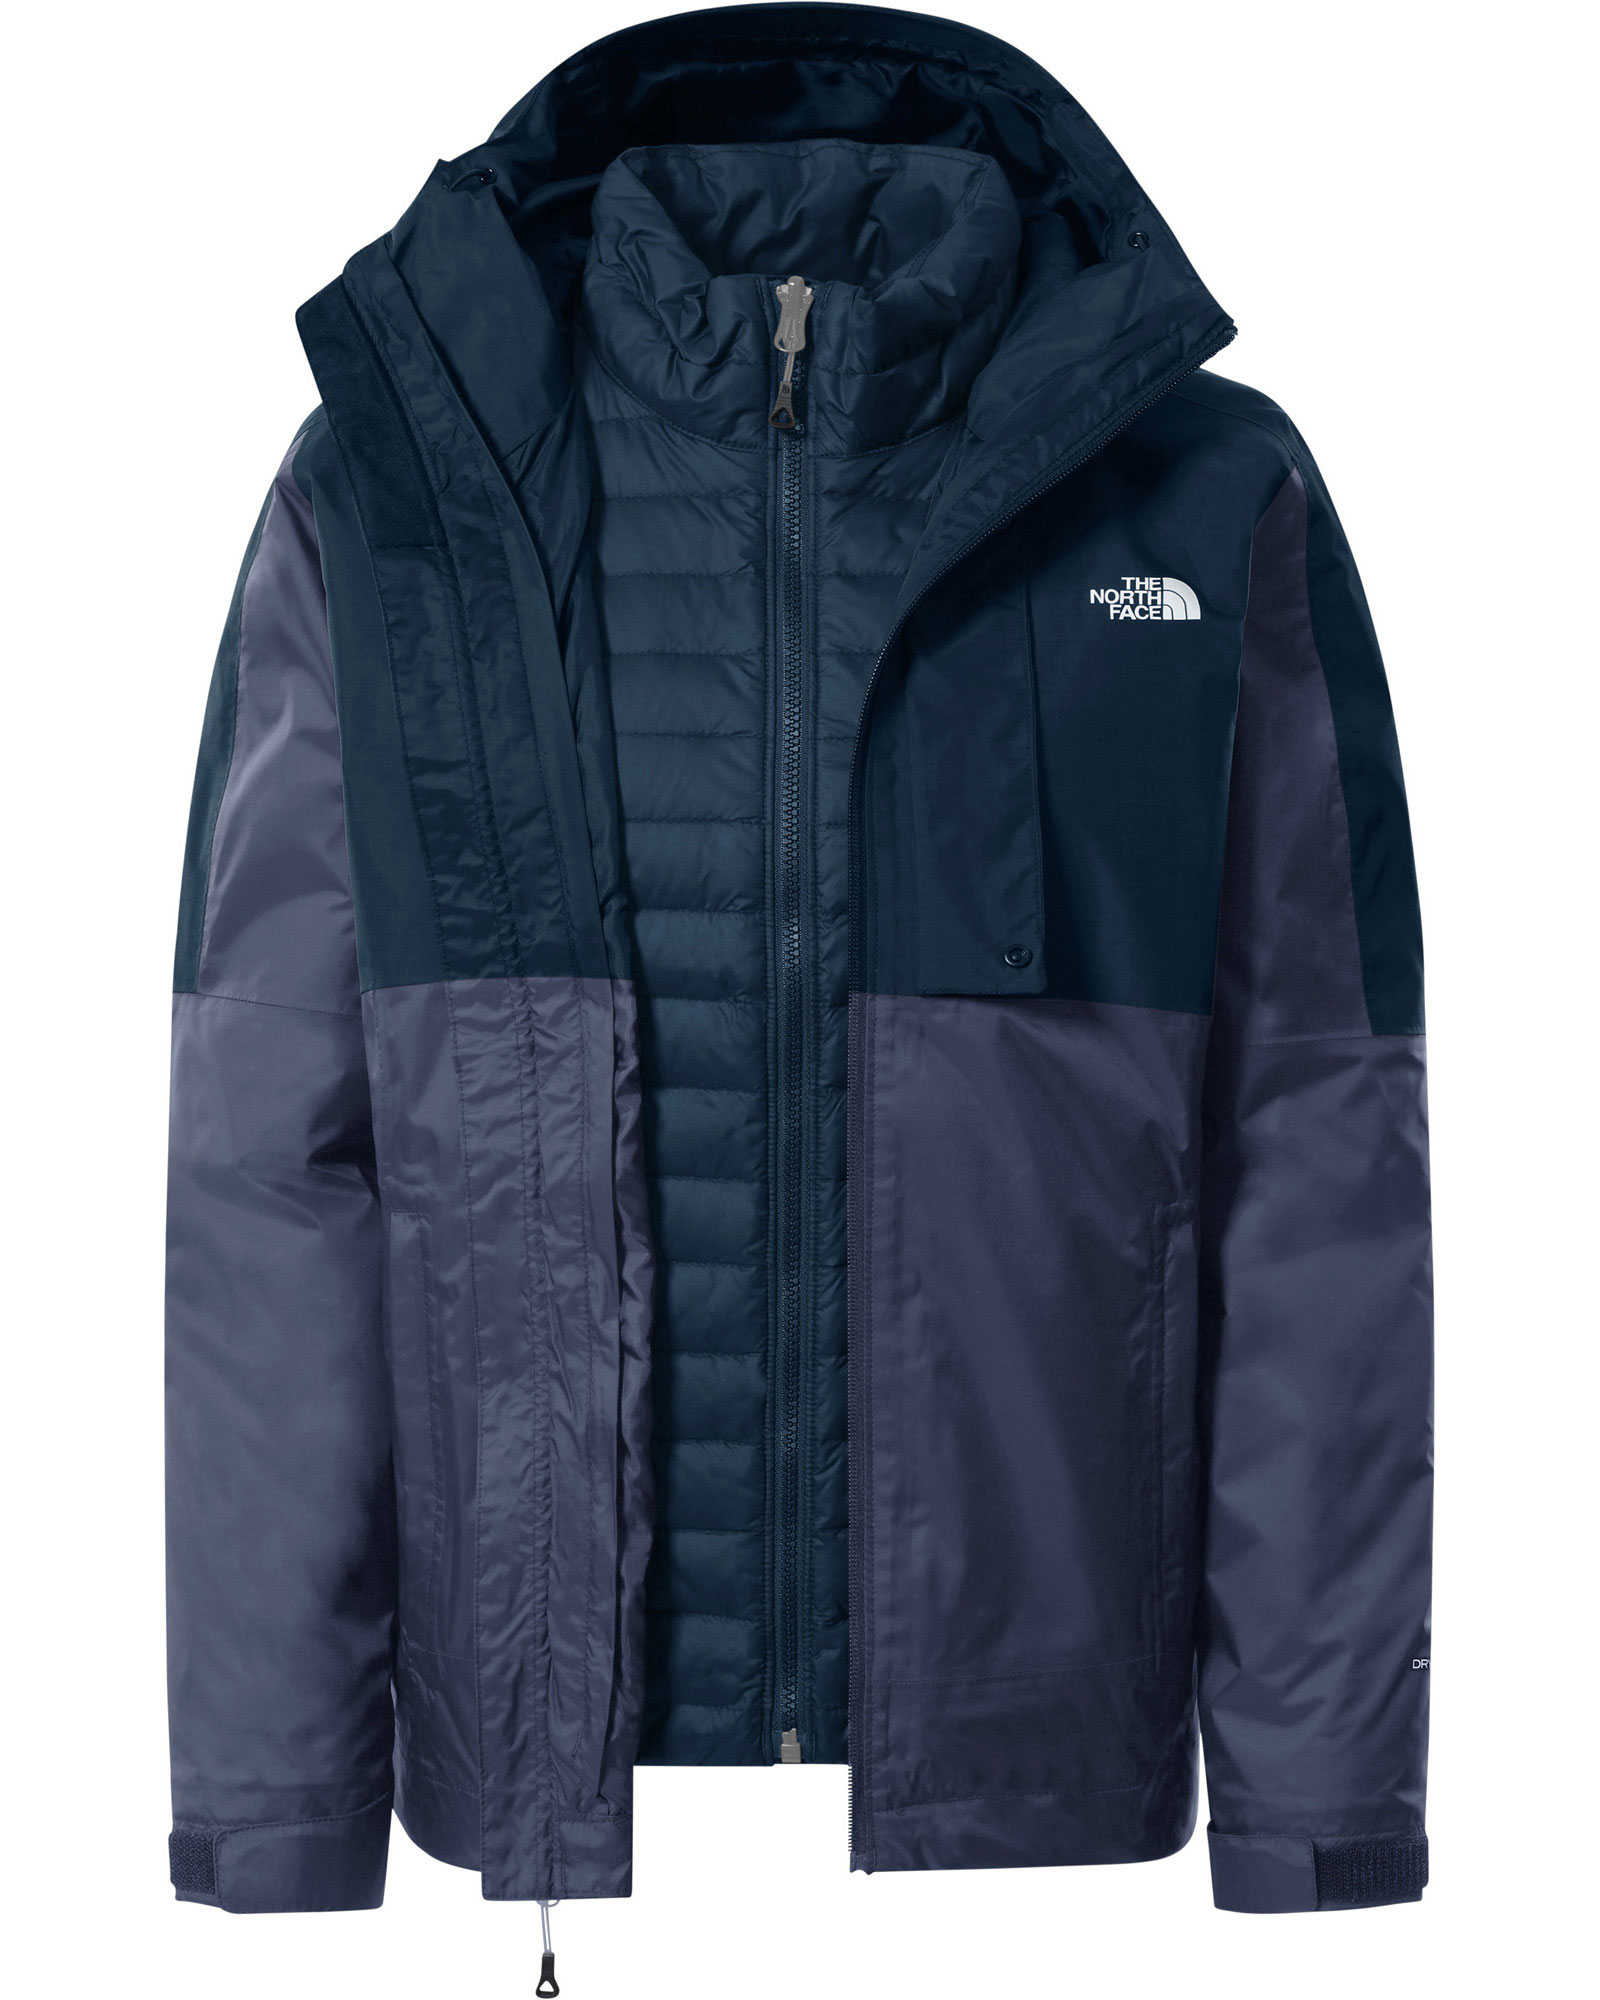 The North Face Down Insulated Triclimate Women’s Parka Jacket - Shady Blue XS